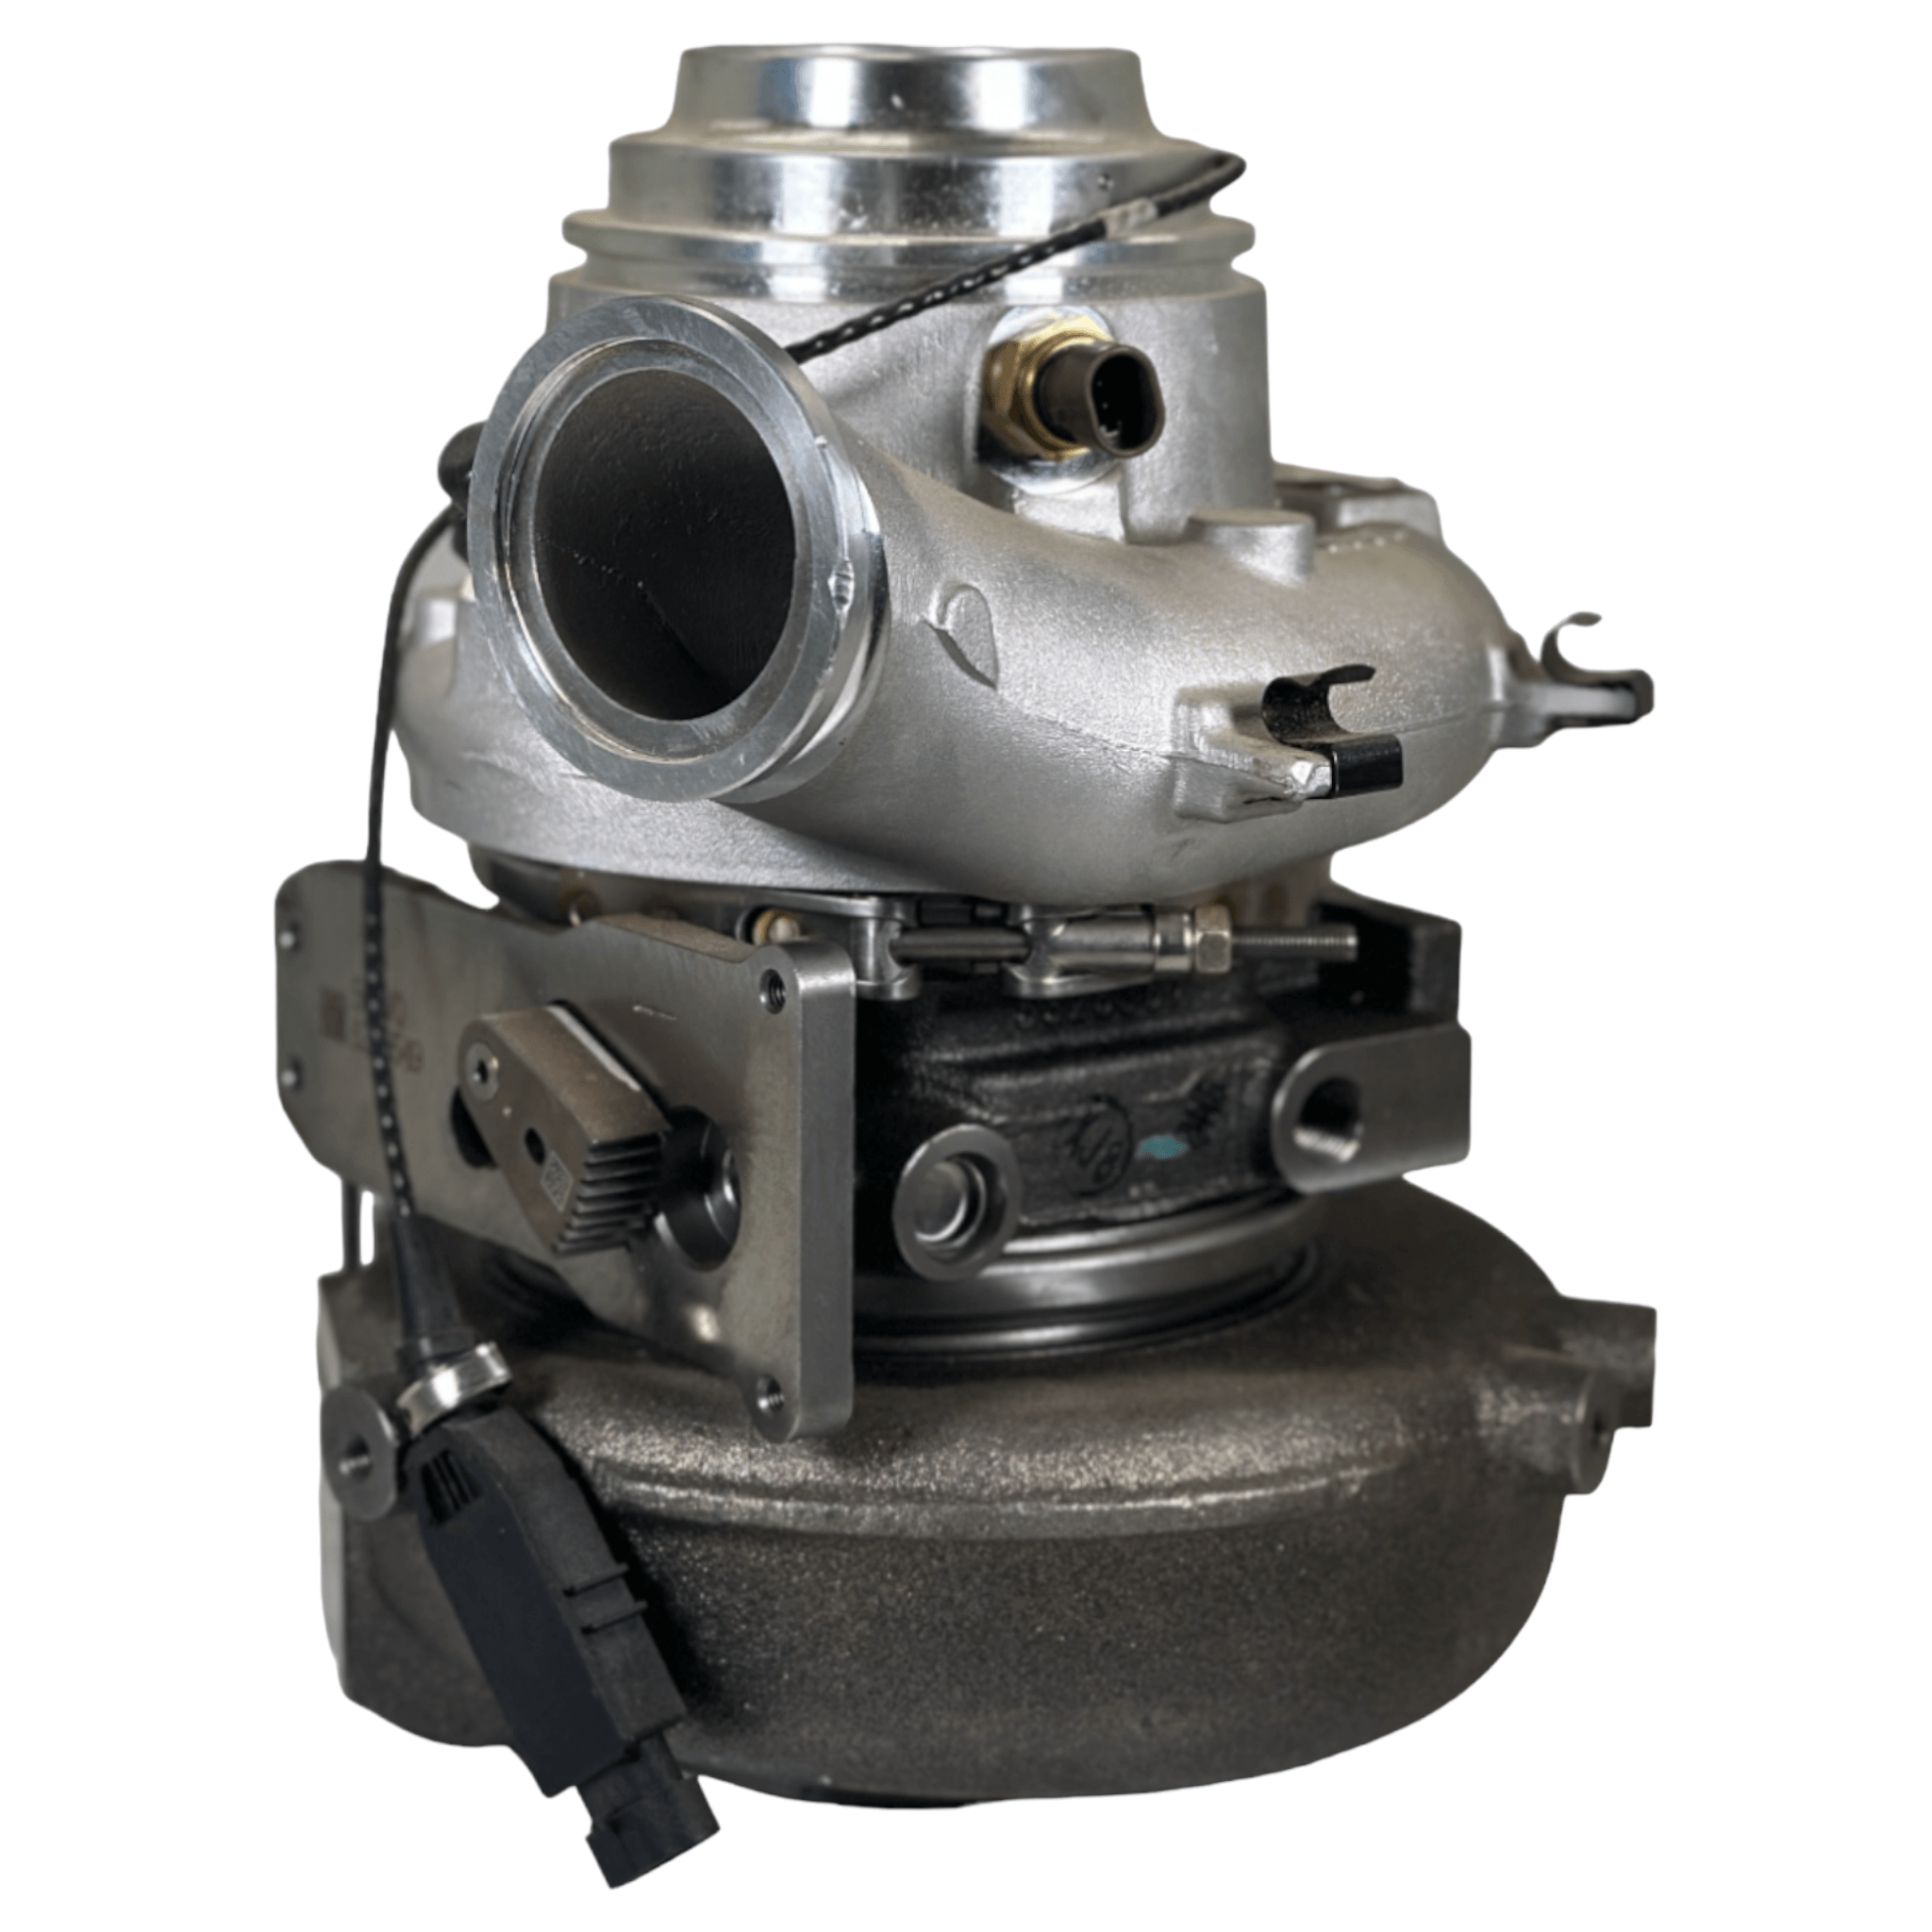 5327132 Genuine Cummins Turbocharger For Isx Isx3 - ADVANCED TRUCK PARTS